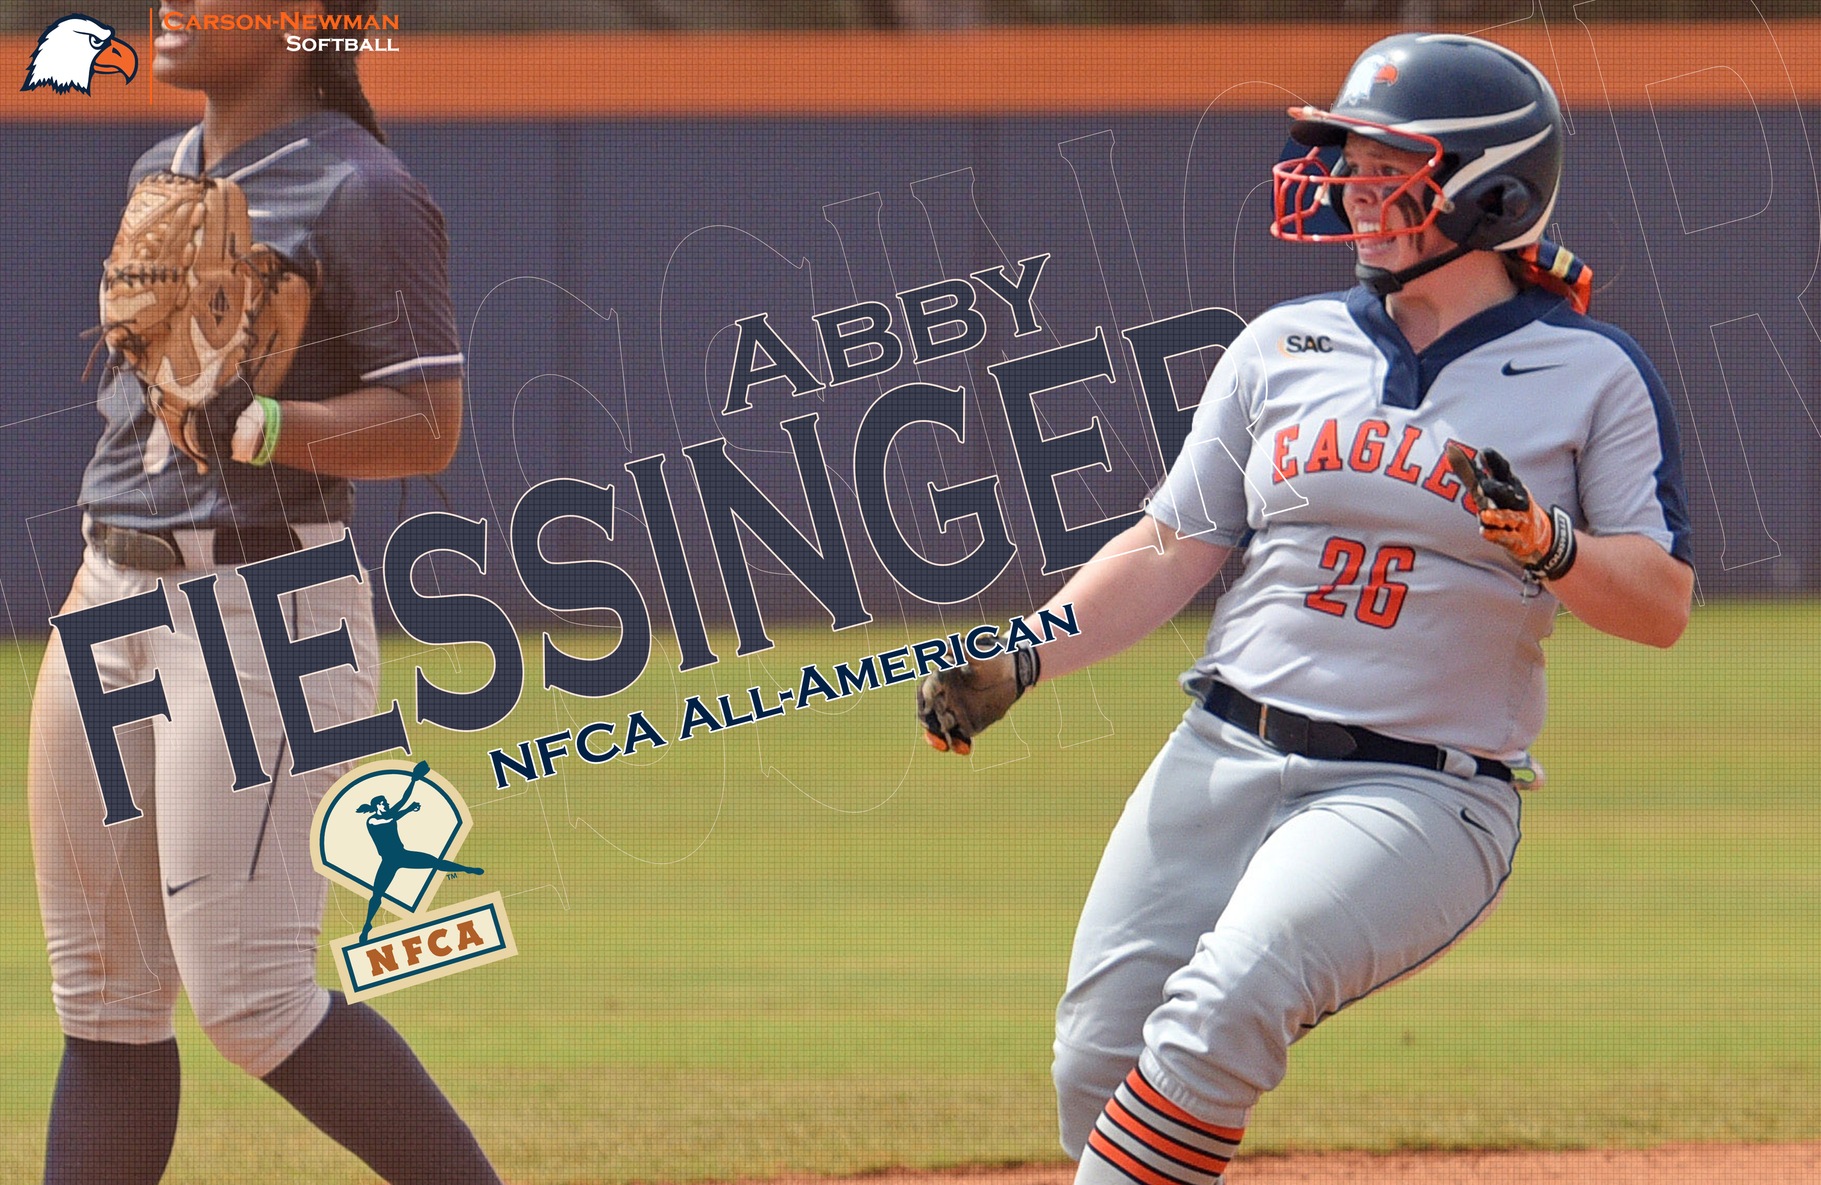 Fiessinger ropes in All-America honors from NFCA, D2CCA